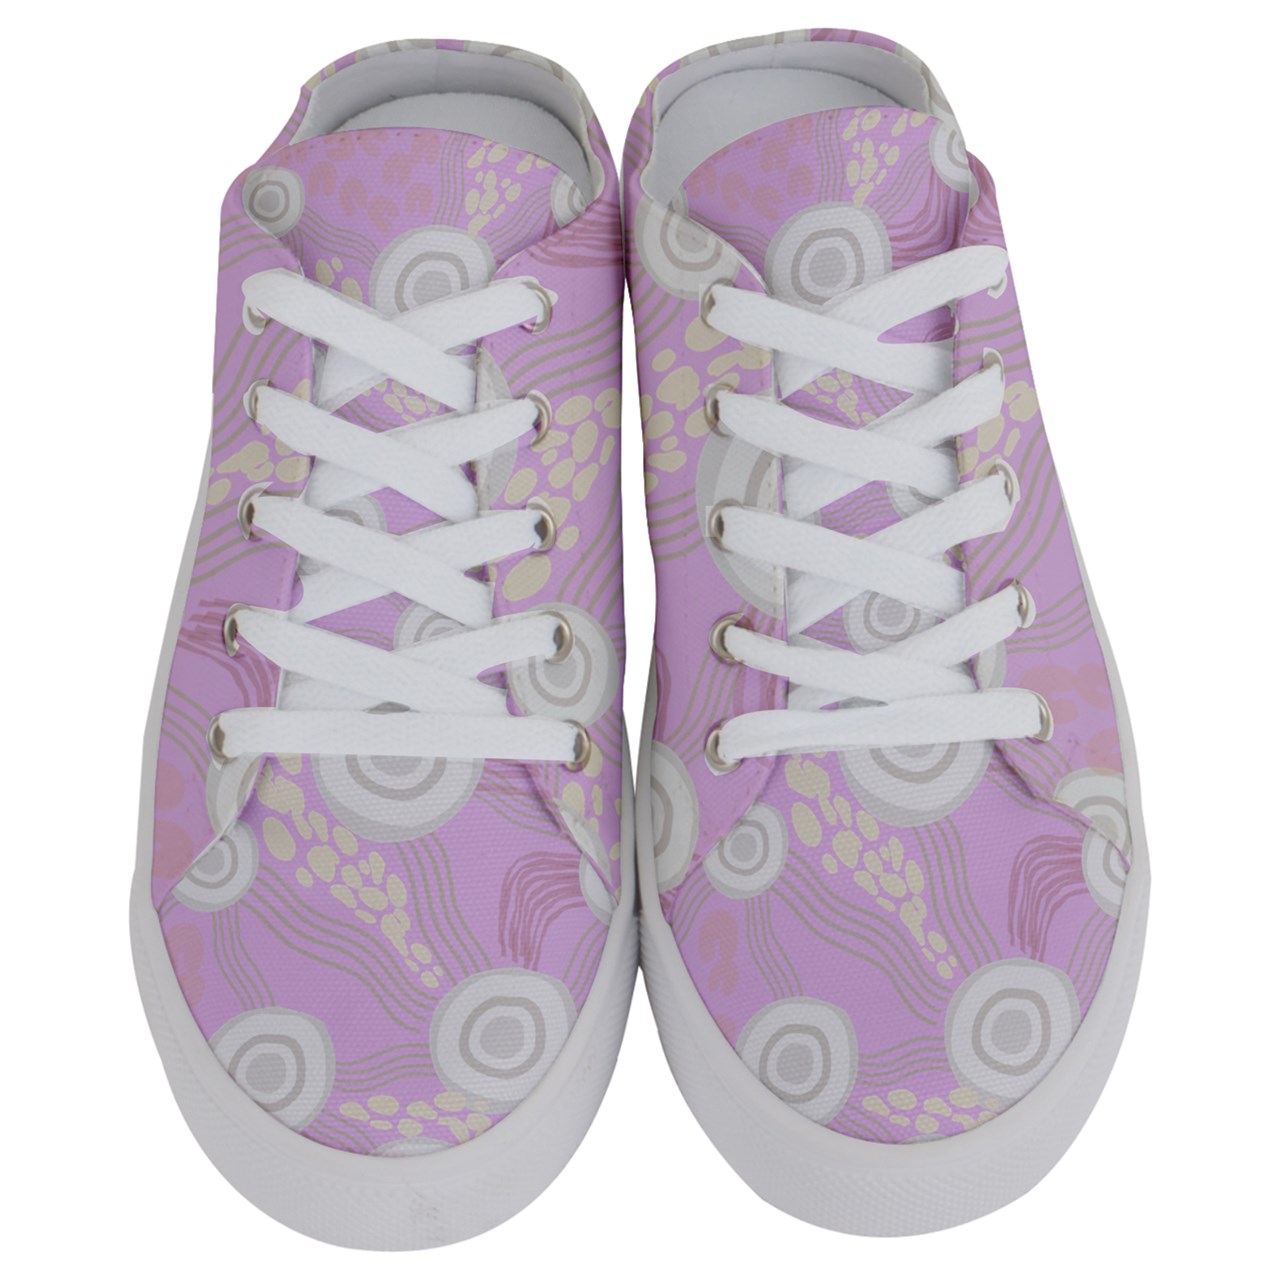 Lilac Dreaming Fashion Sneakers by Koori Threads